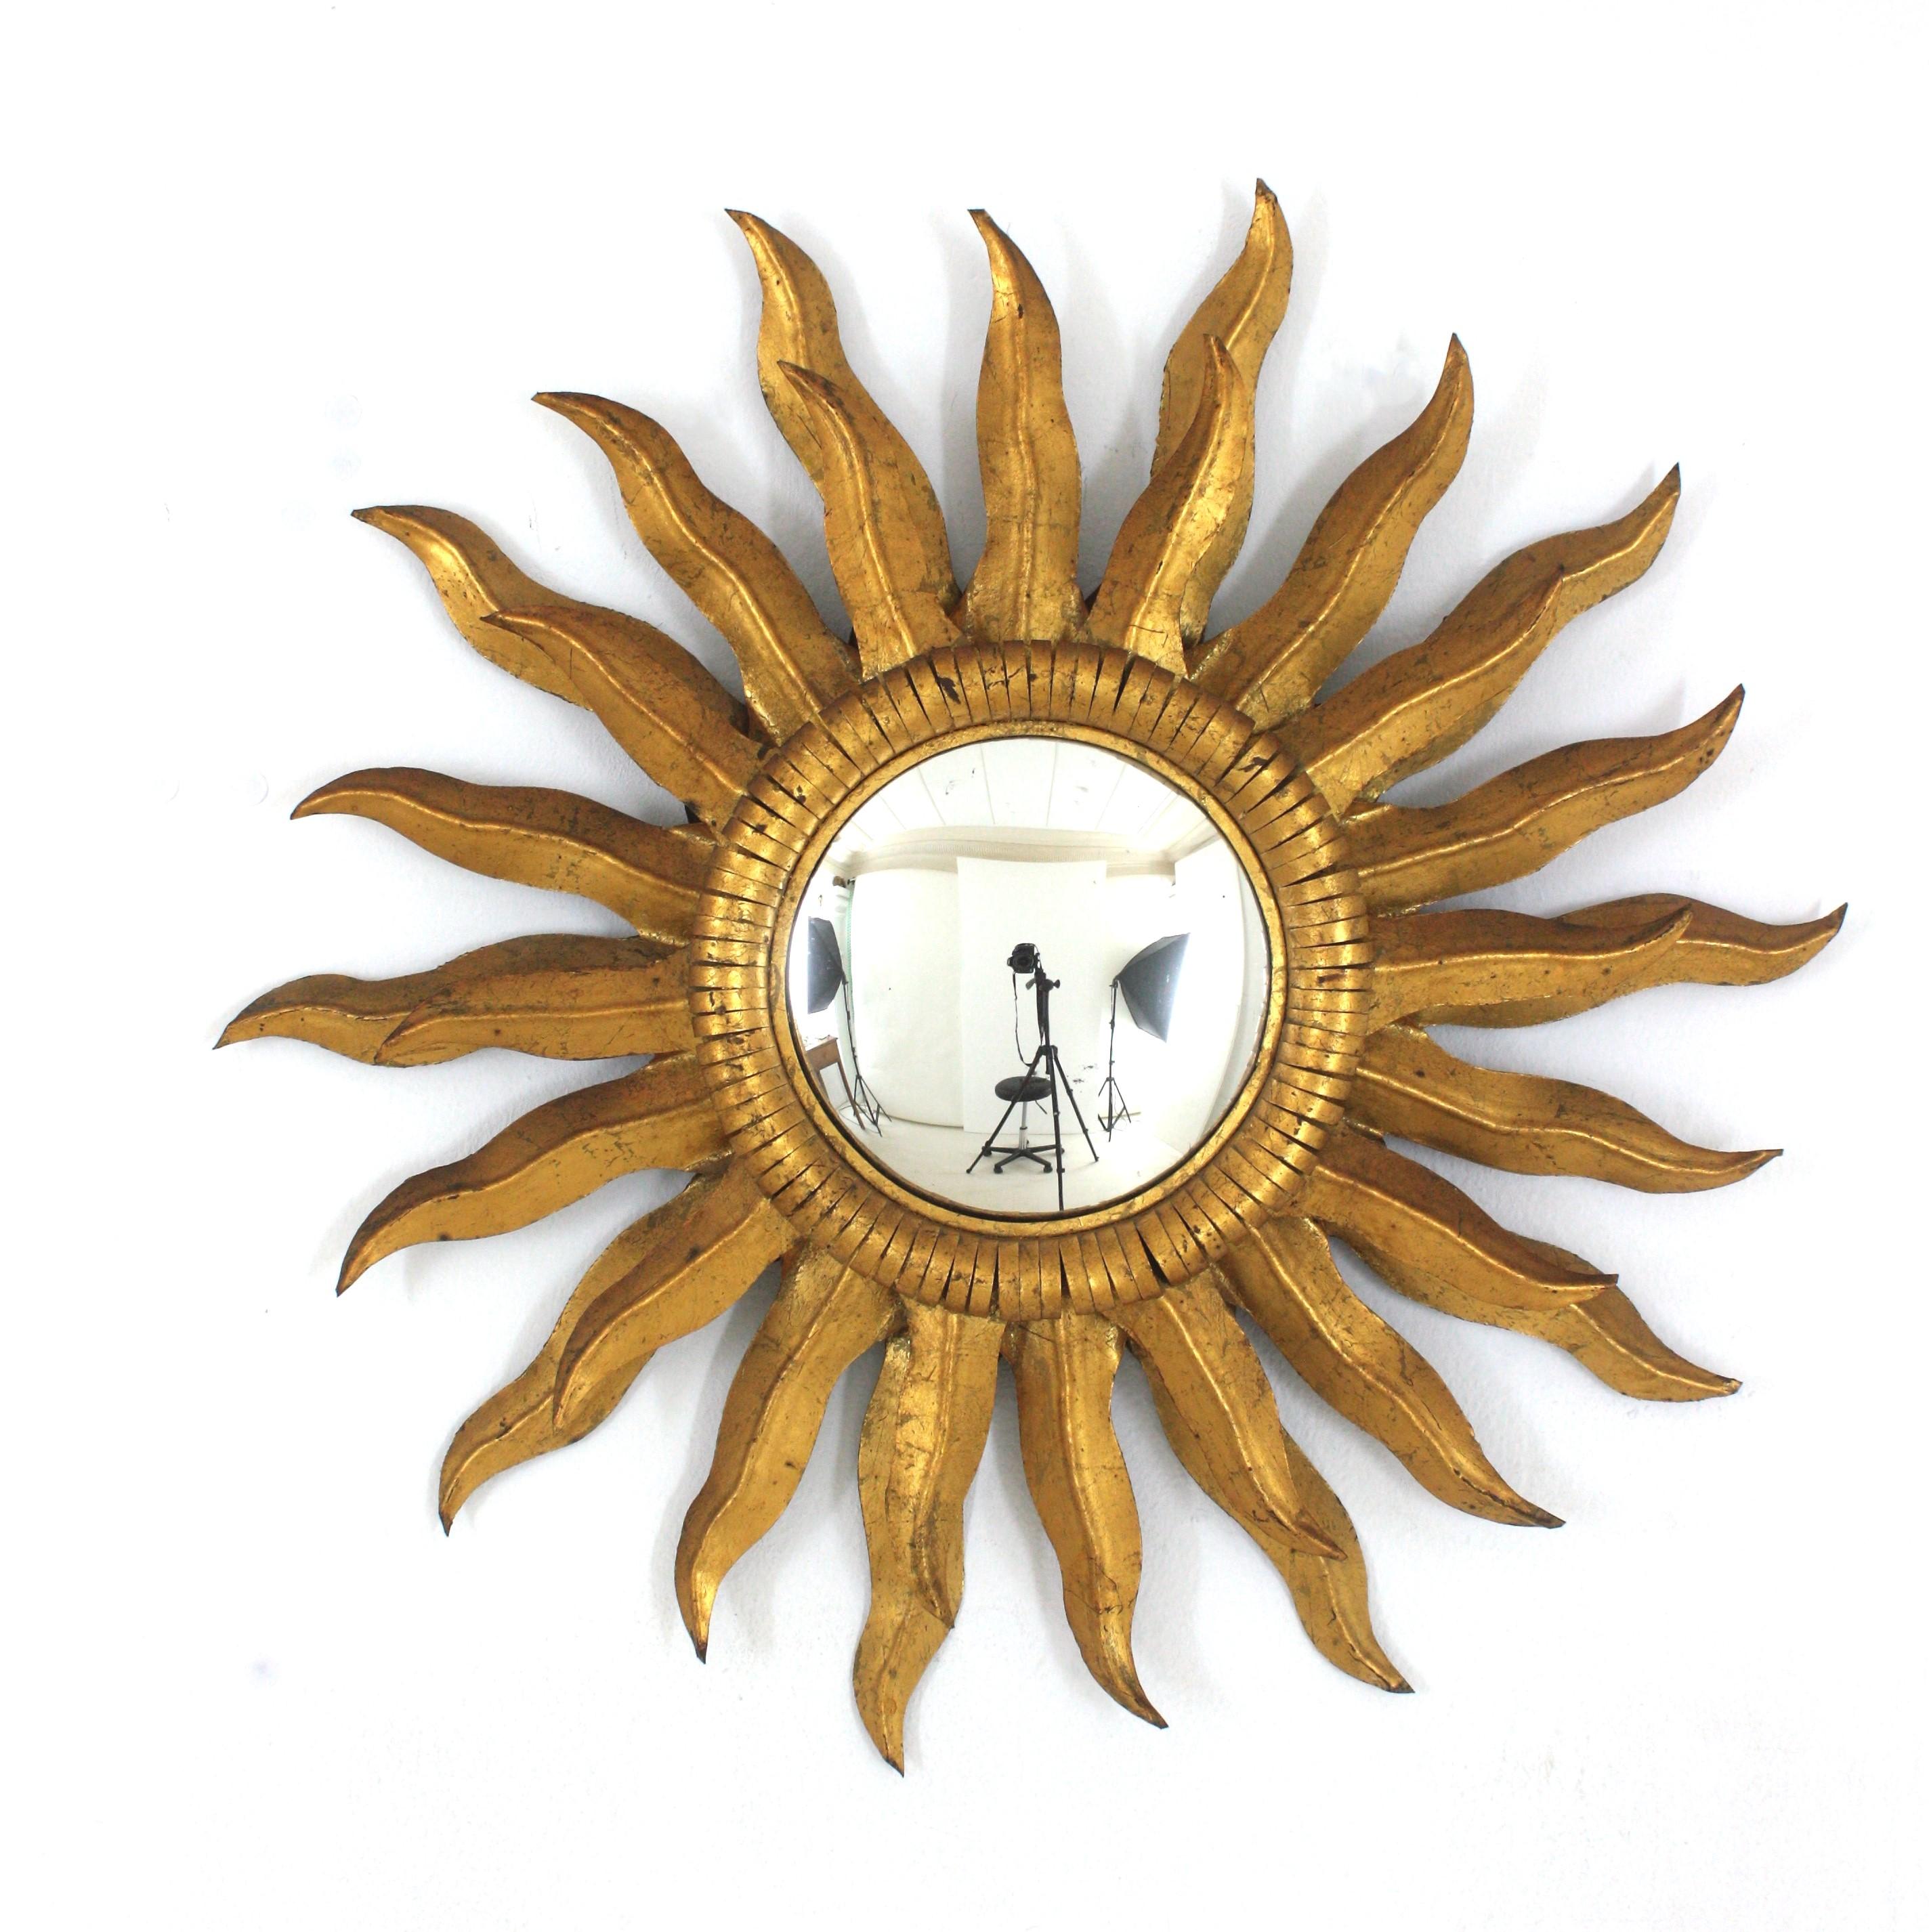 Spanish Double Layered Convex Sunburst Mirror in Gilt Metal, 1950s For Sale 7